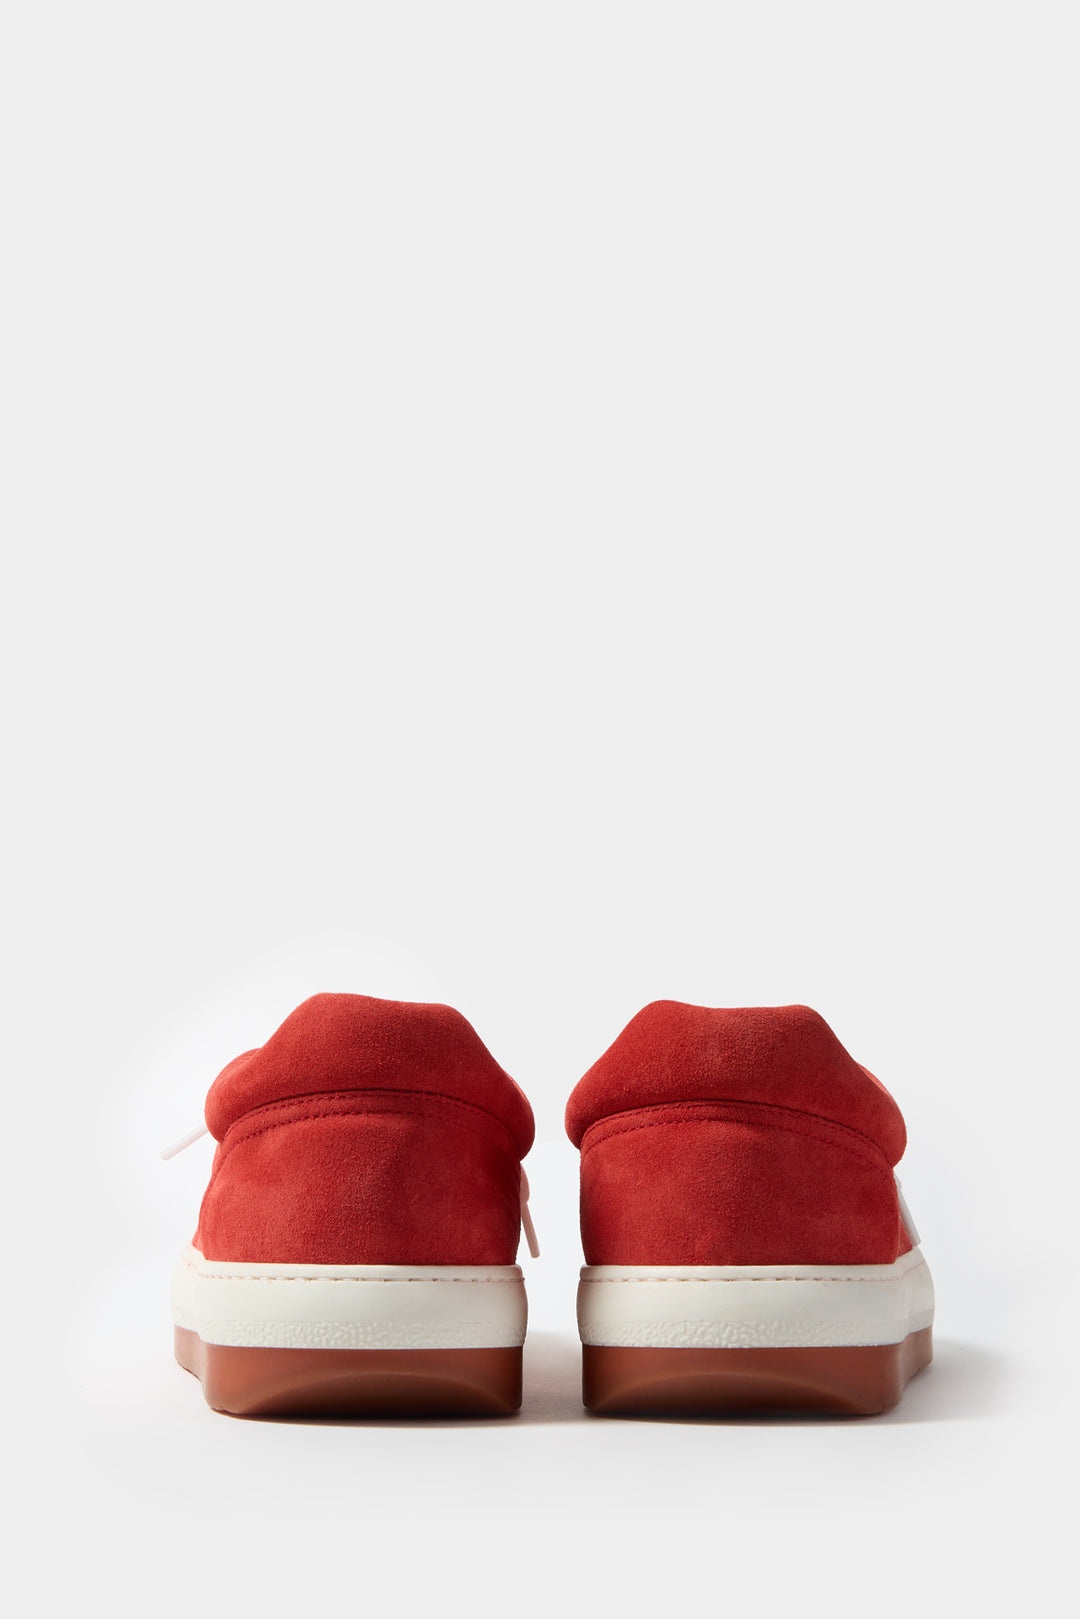 DREAMY SHOES / suede / red - 3